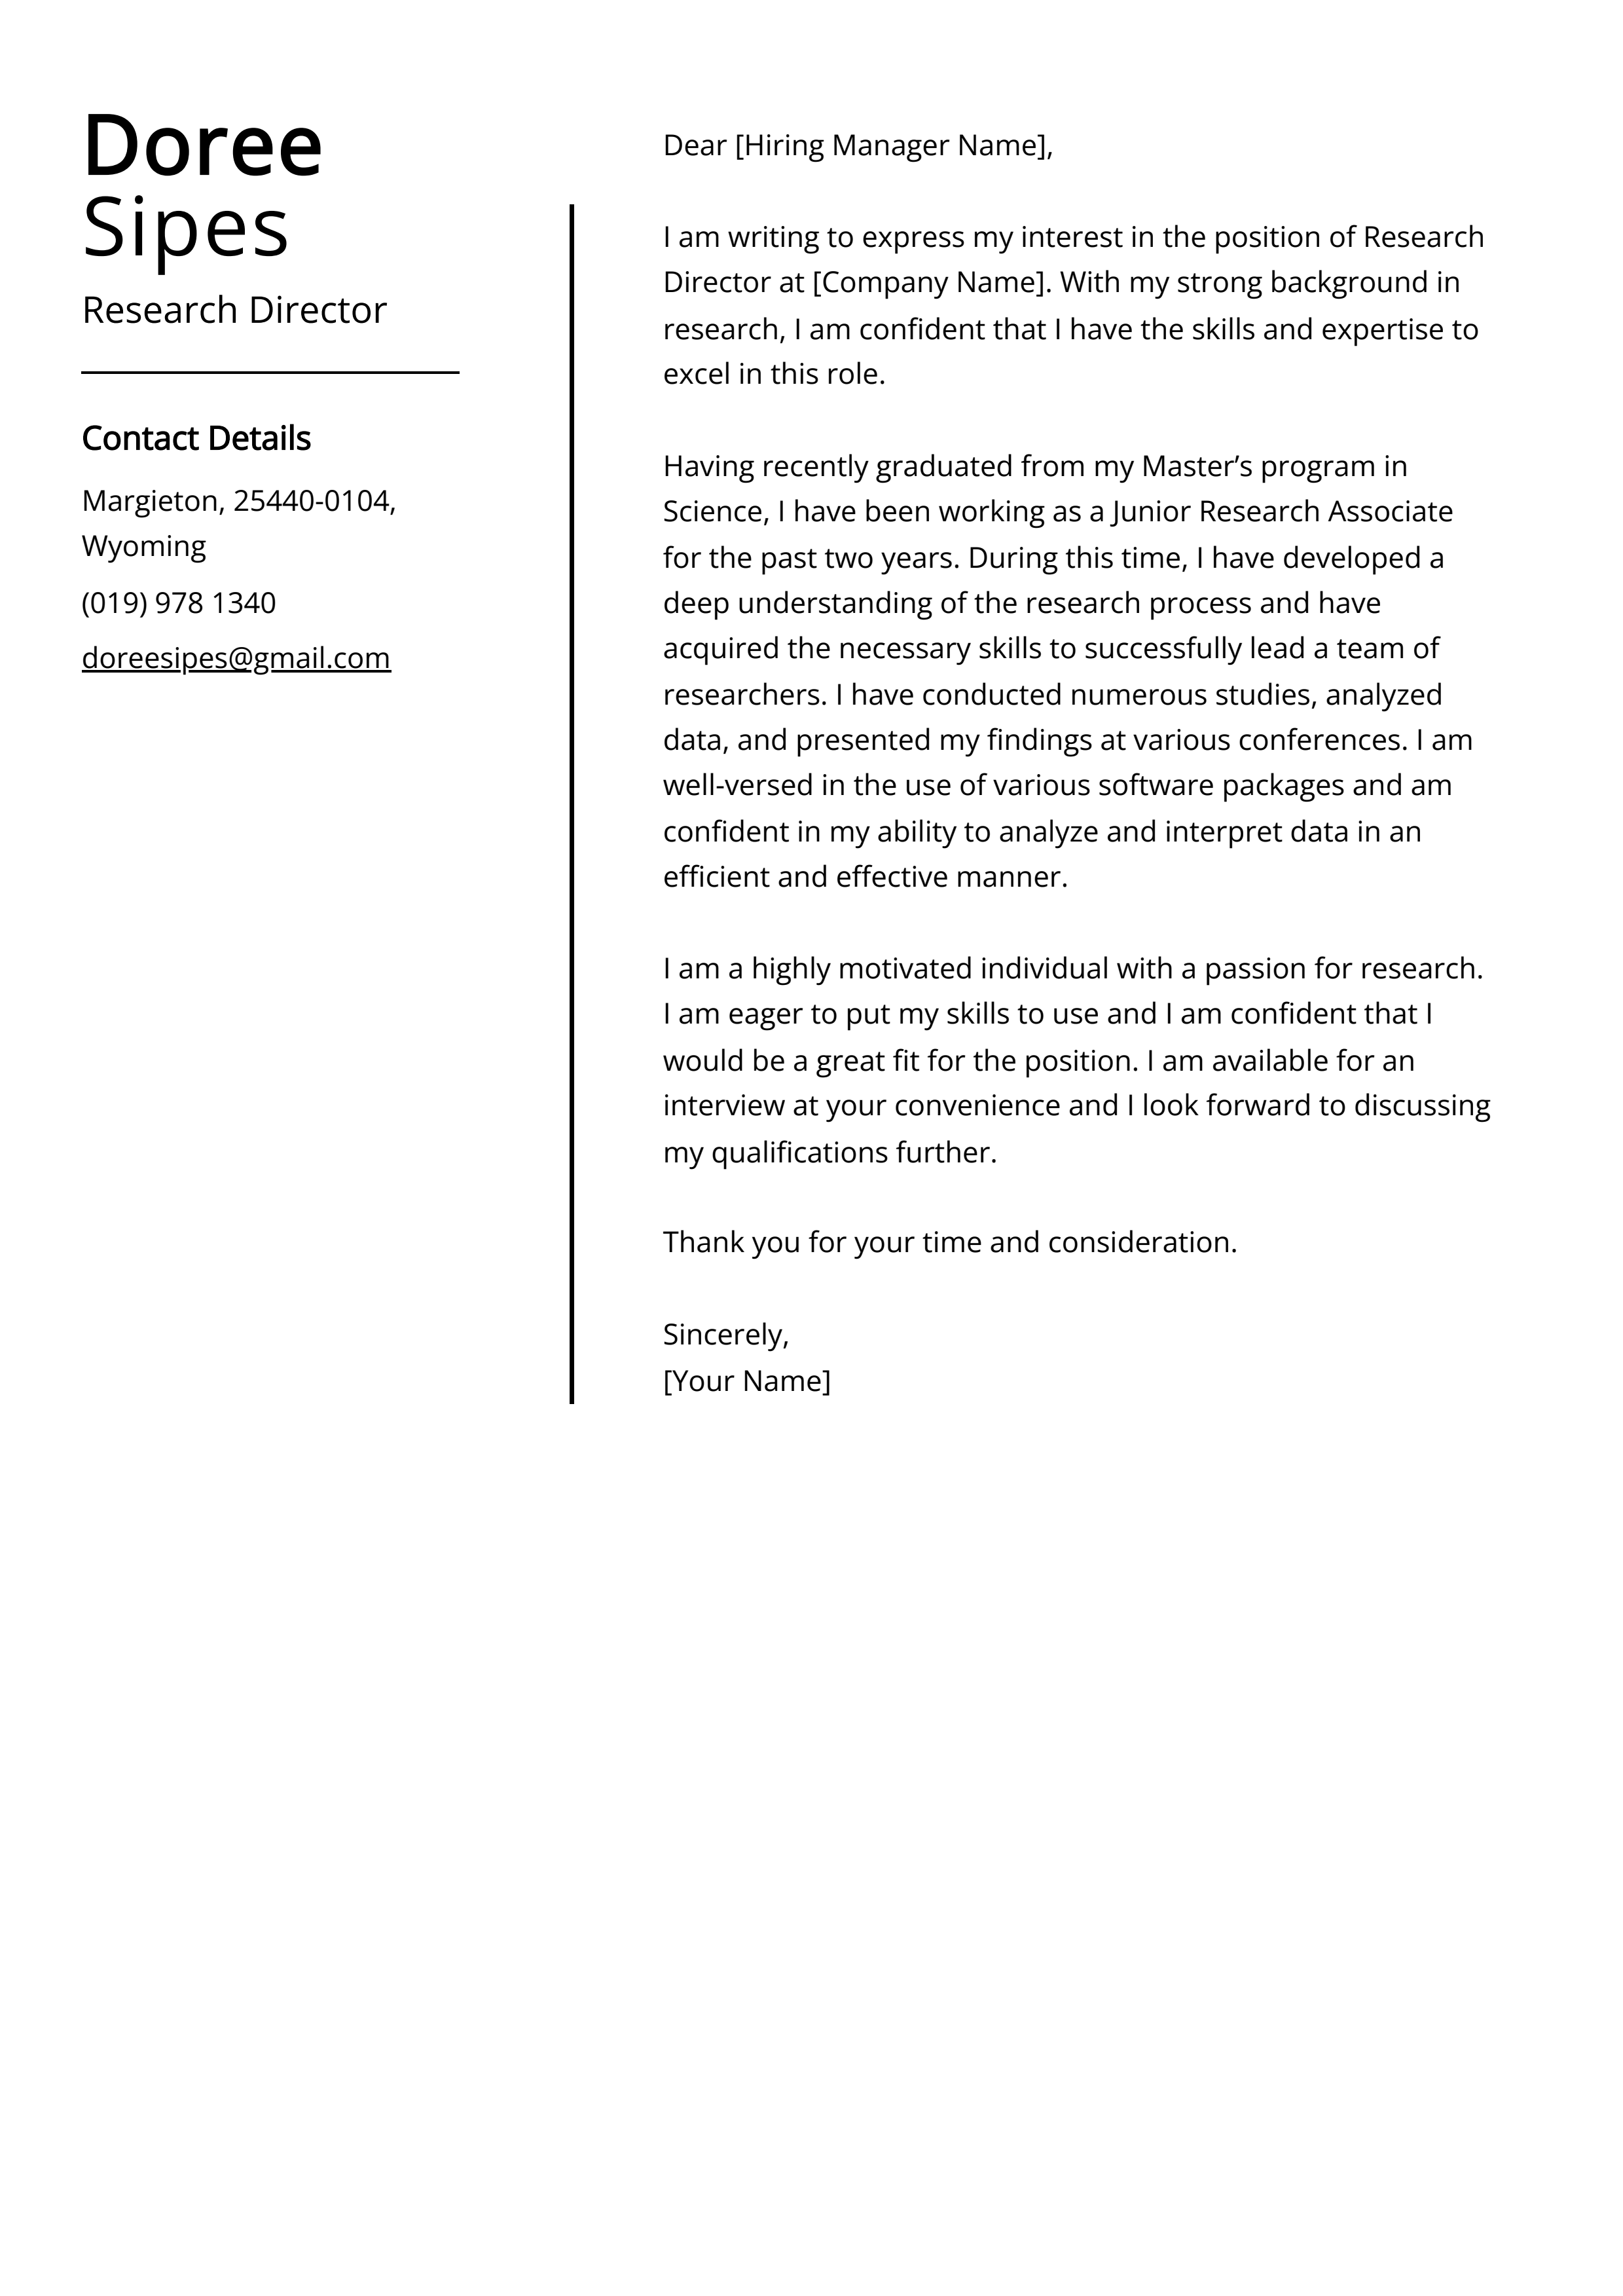 Research Director Cover Letter Example